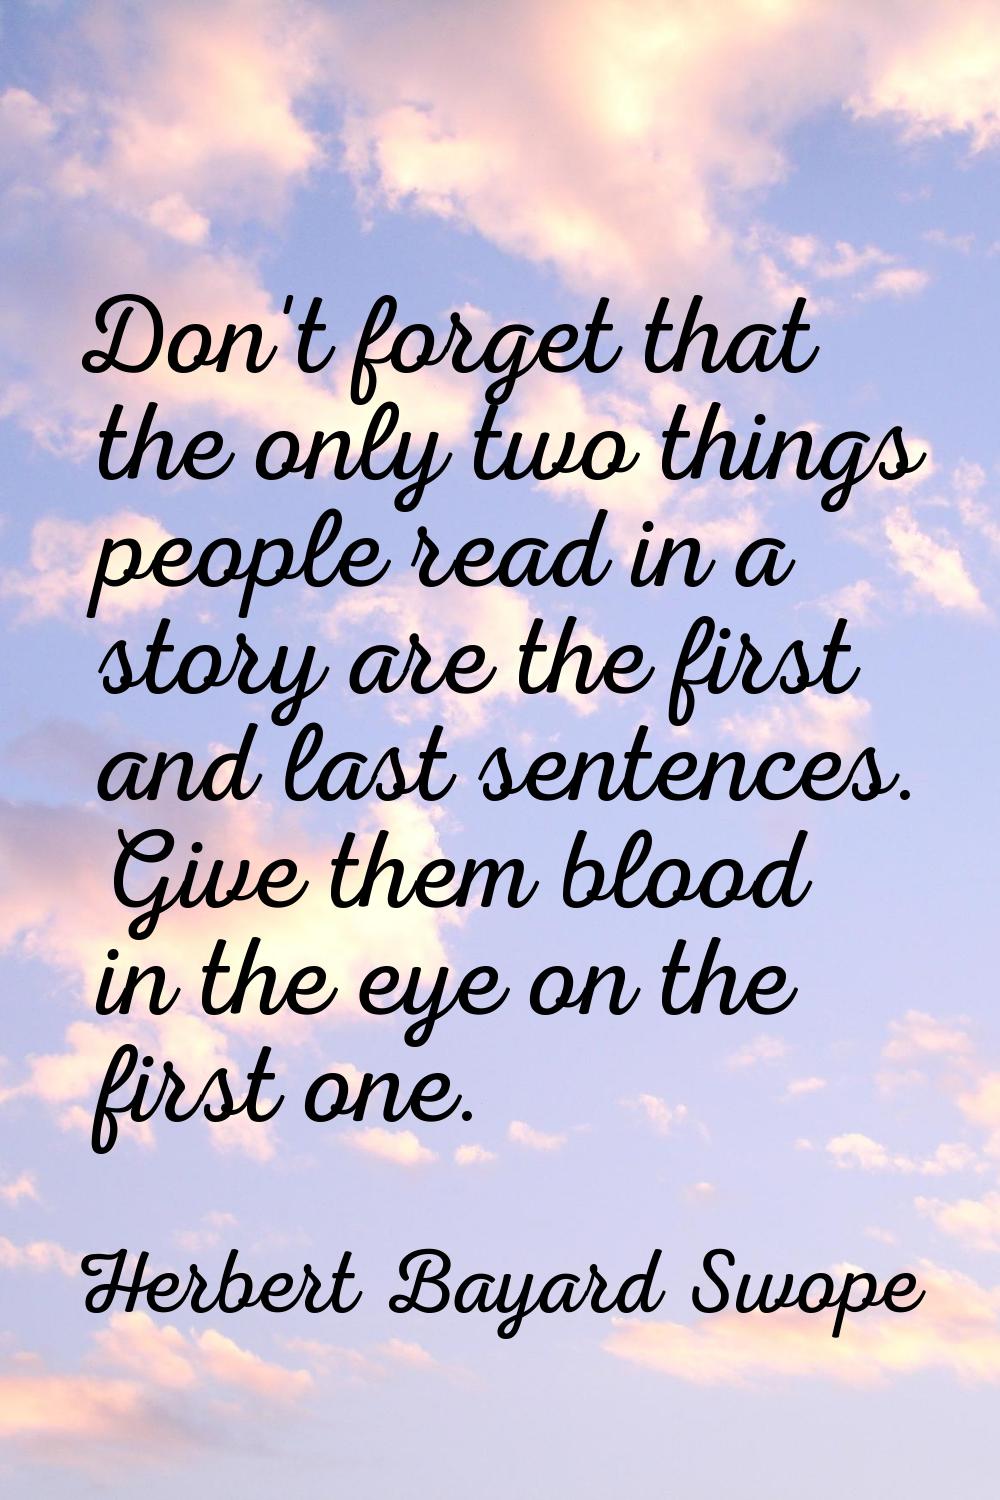 Don't forget that the only two things people read in a story are the first and last sentences. Give